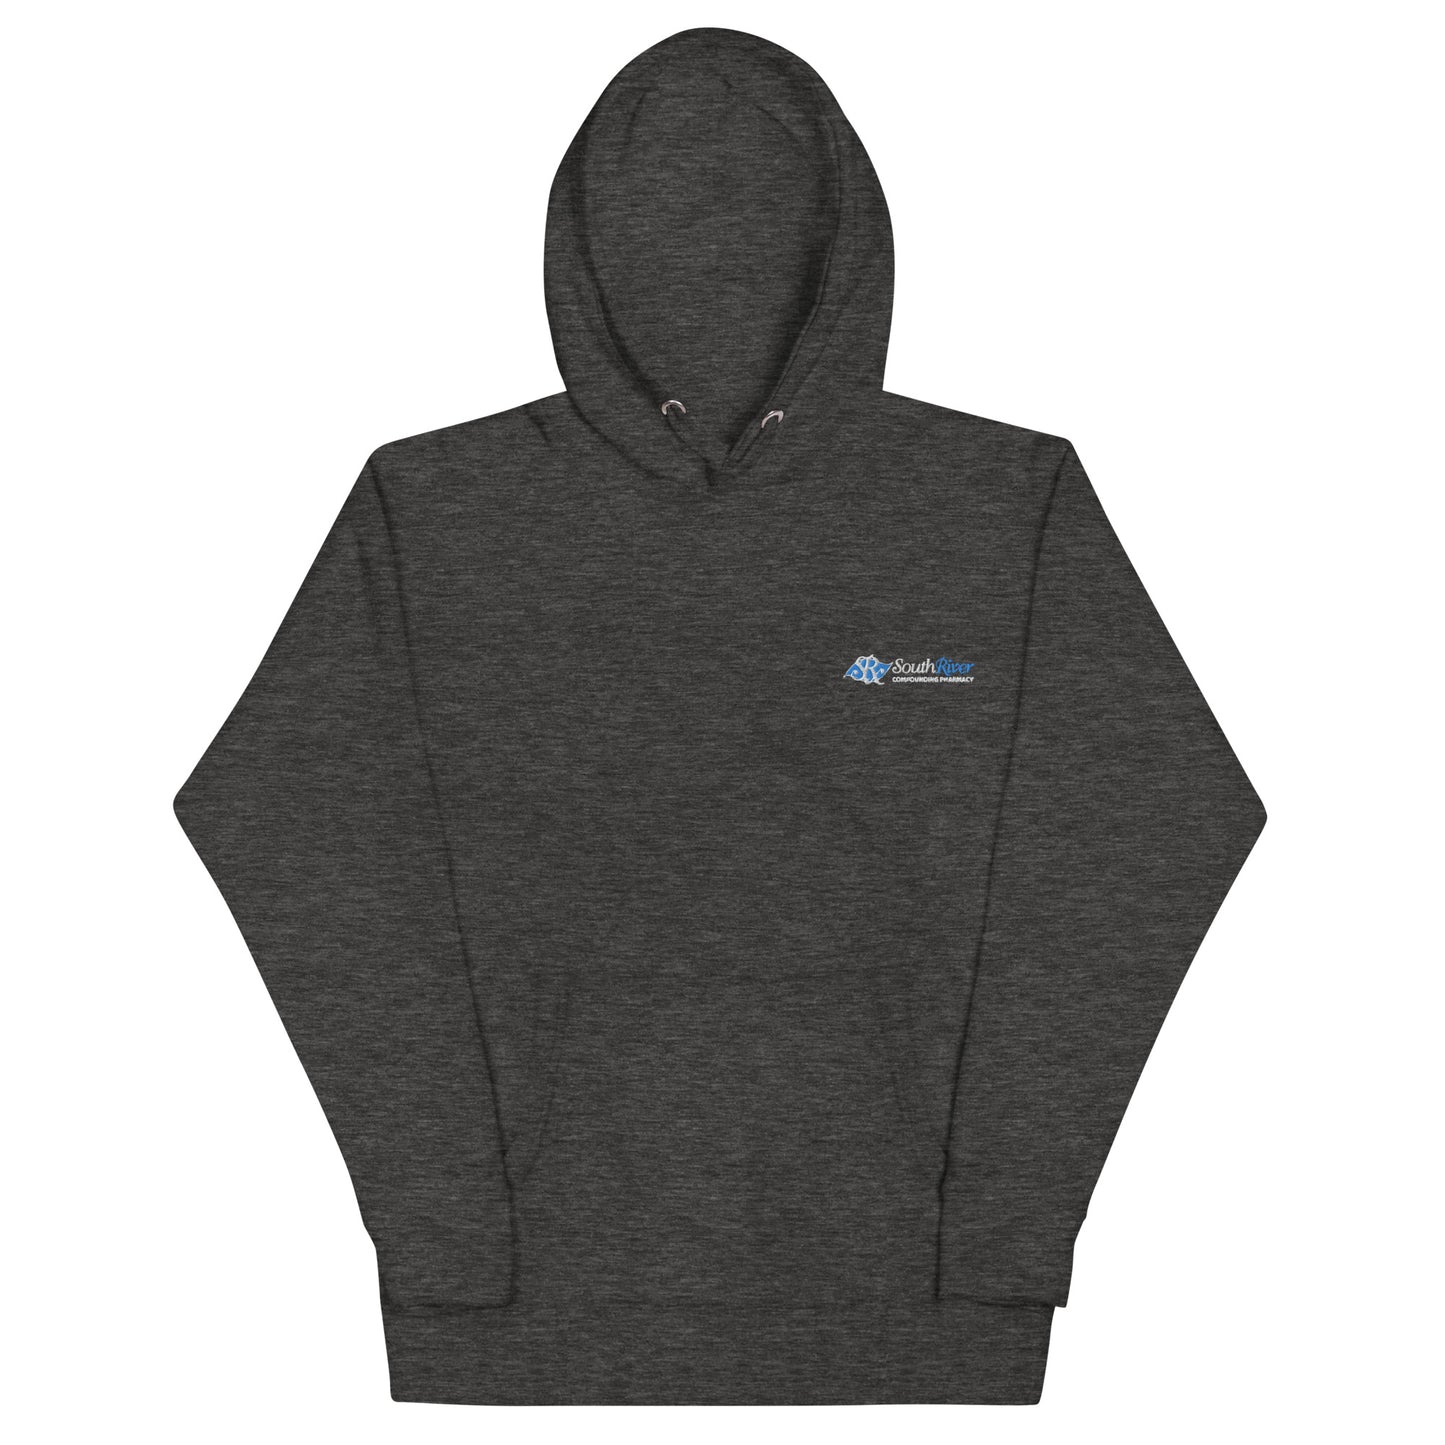 Unisex Premium Hoodie (fitted cut) - South River